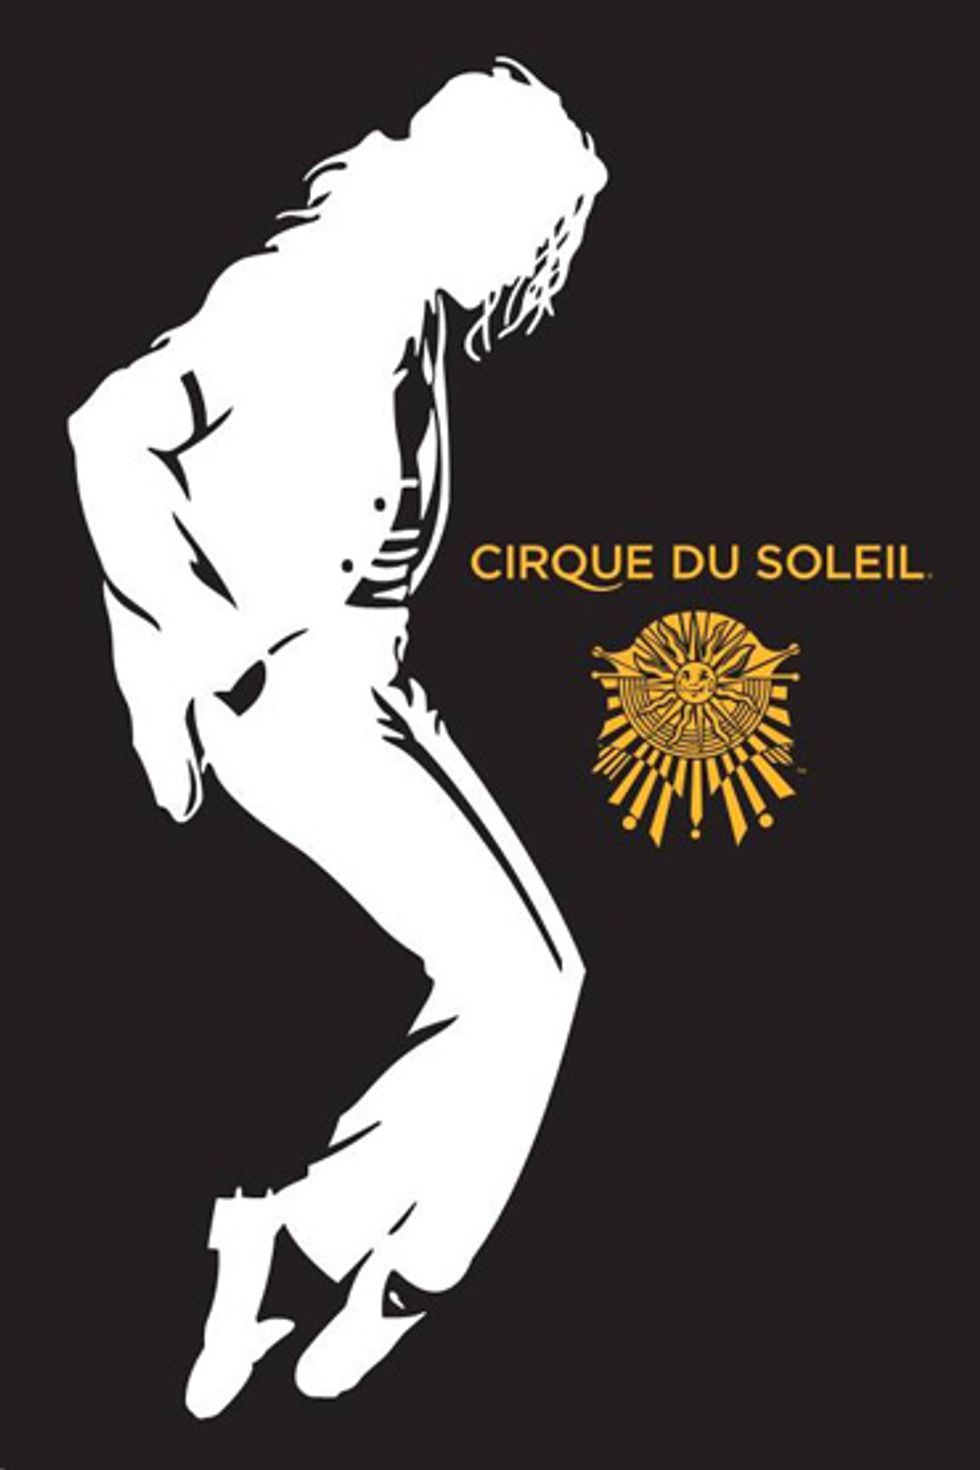 Ticket Giveaway: See Michael Jackson, The IMMORTAL World Tour by Cirque du Soleil